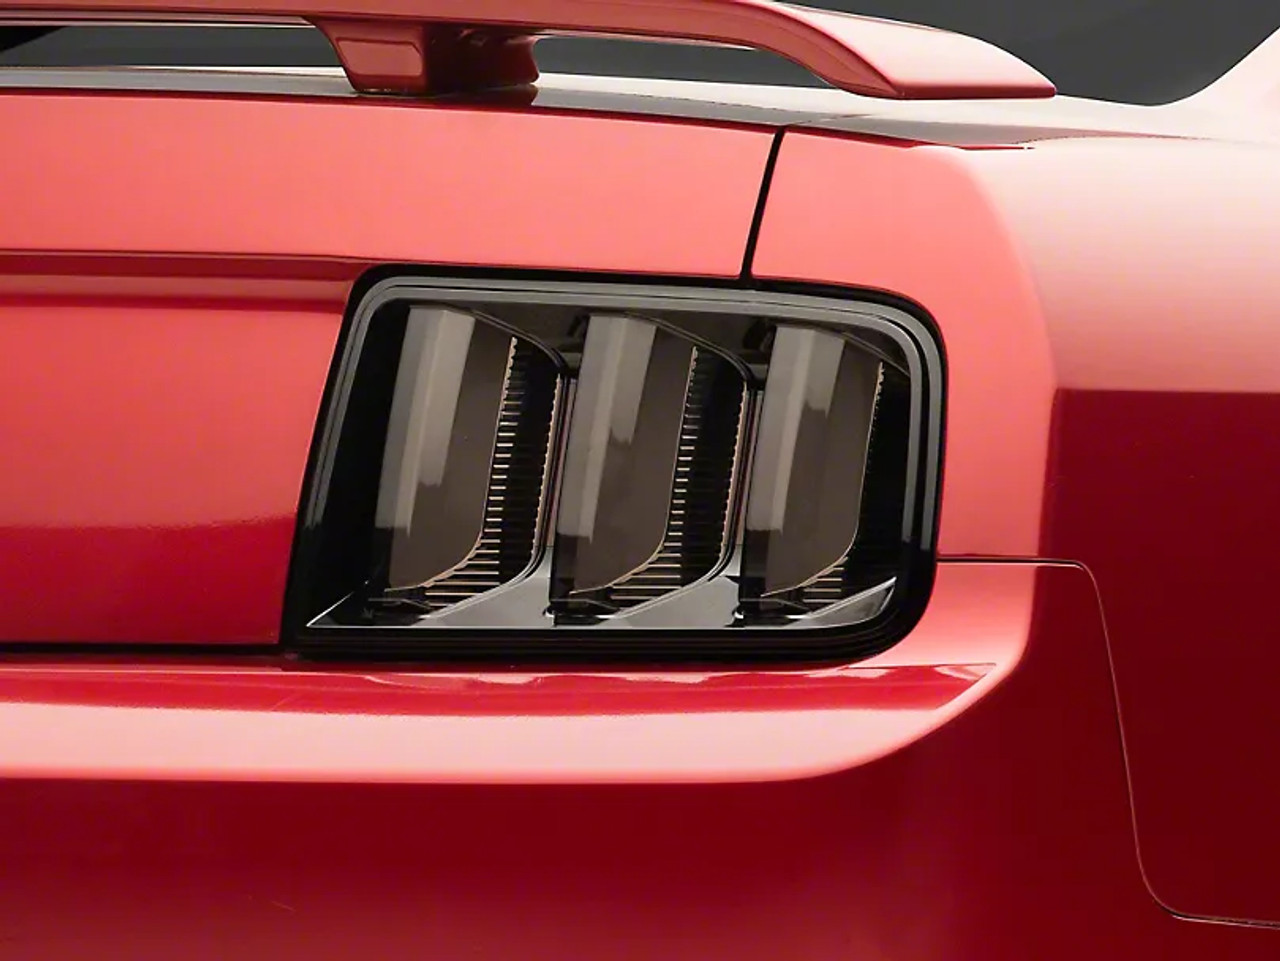 05-09 Ford Mustang LED Tail Lights- Black Housing (Smoked Lens) by Raxiom